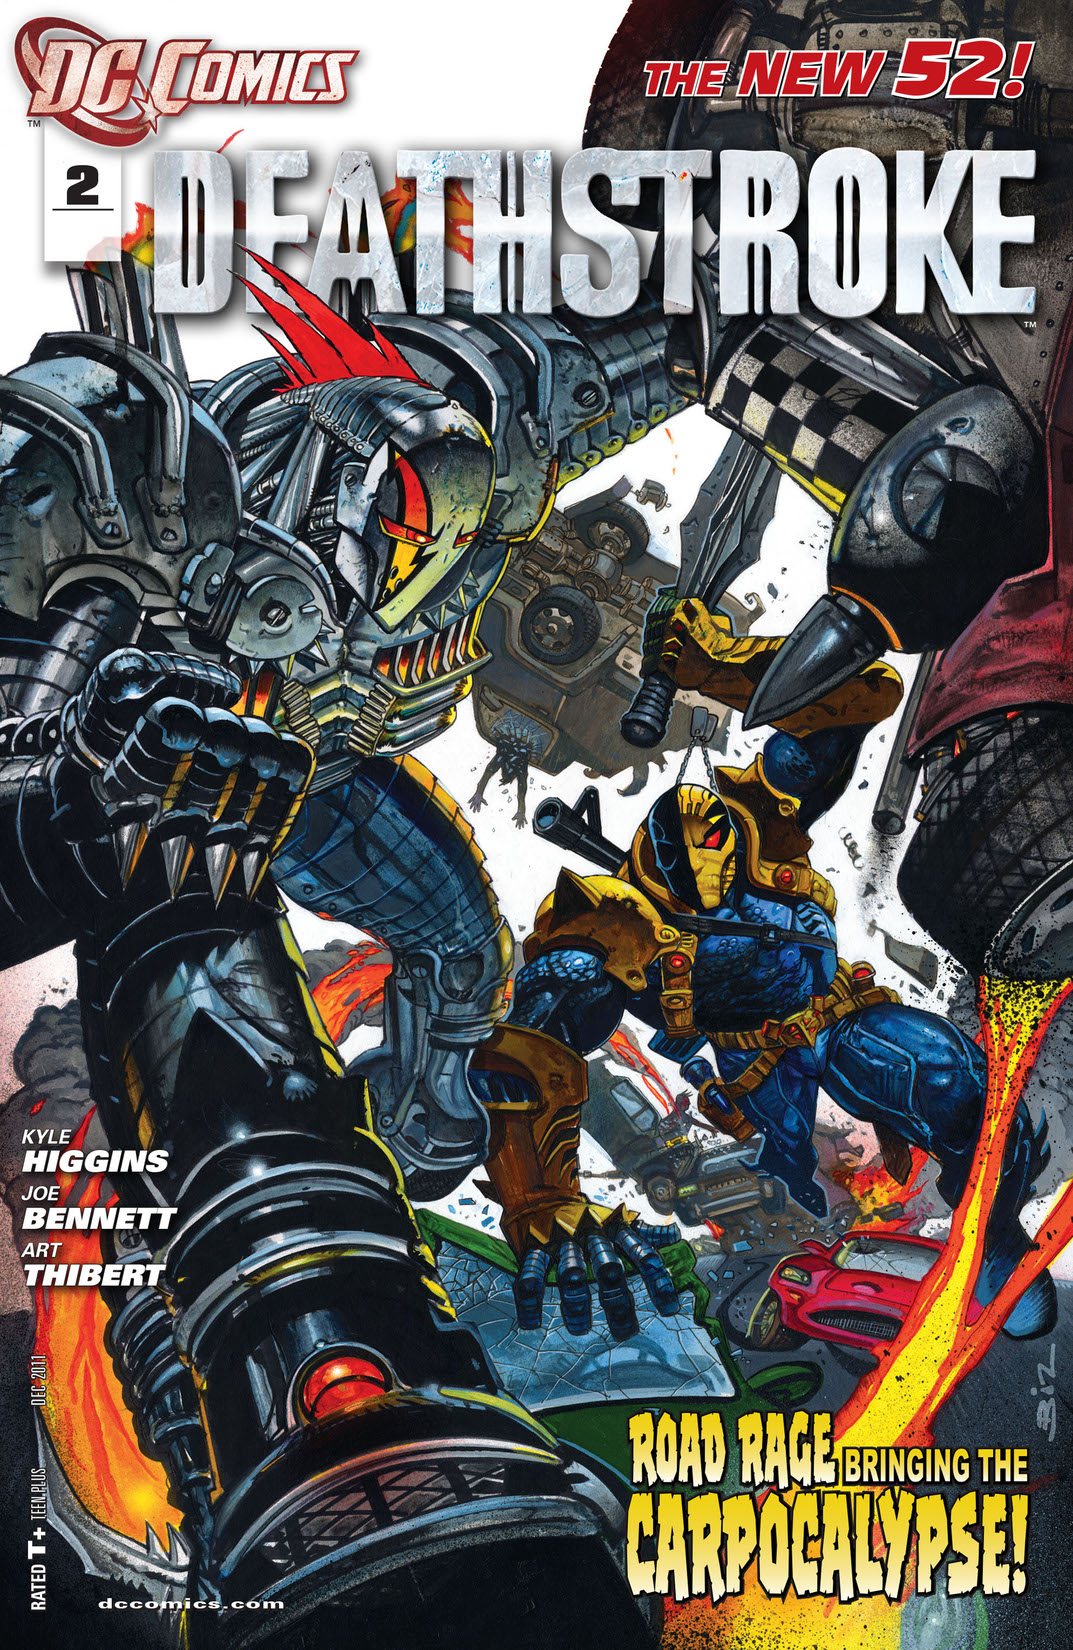 Deathstroke (2011-) #2 preview images